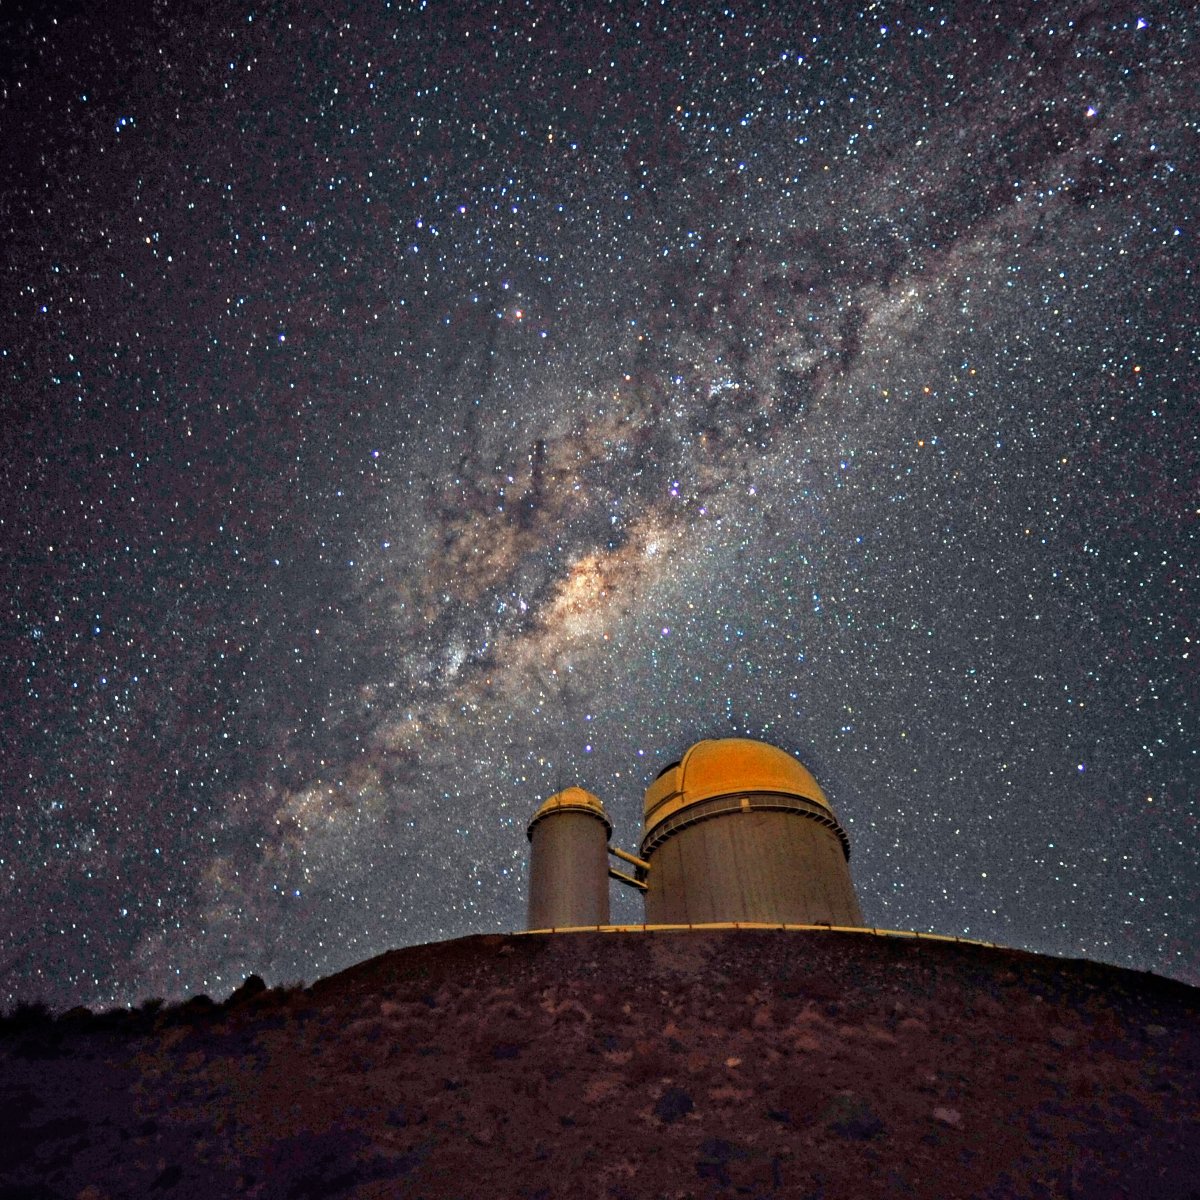 CC BY 4.0: https://commons.wikimedia.org/wiki/File:The_Galactic_Centre_above_the_ESO_3.6-metre_telescope.jpg